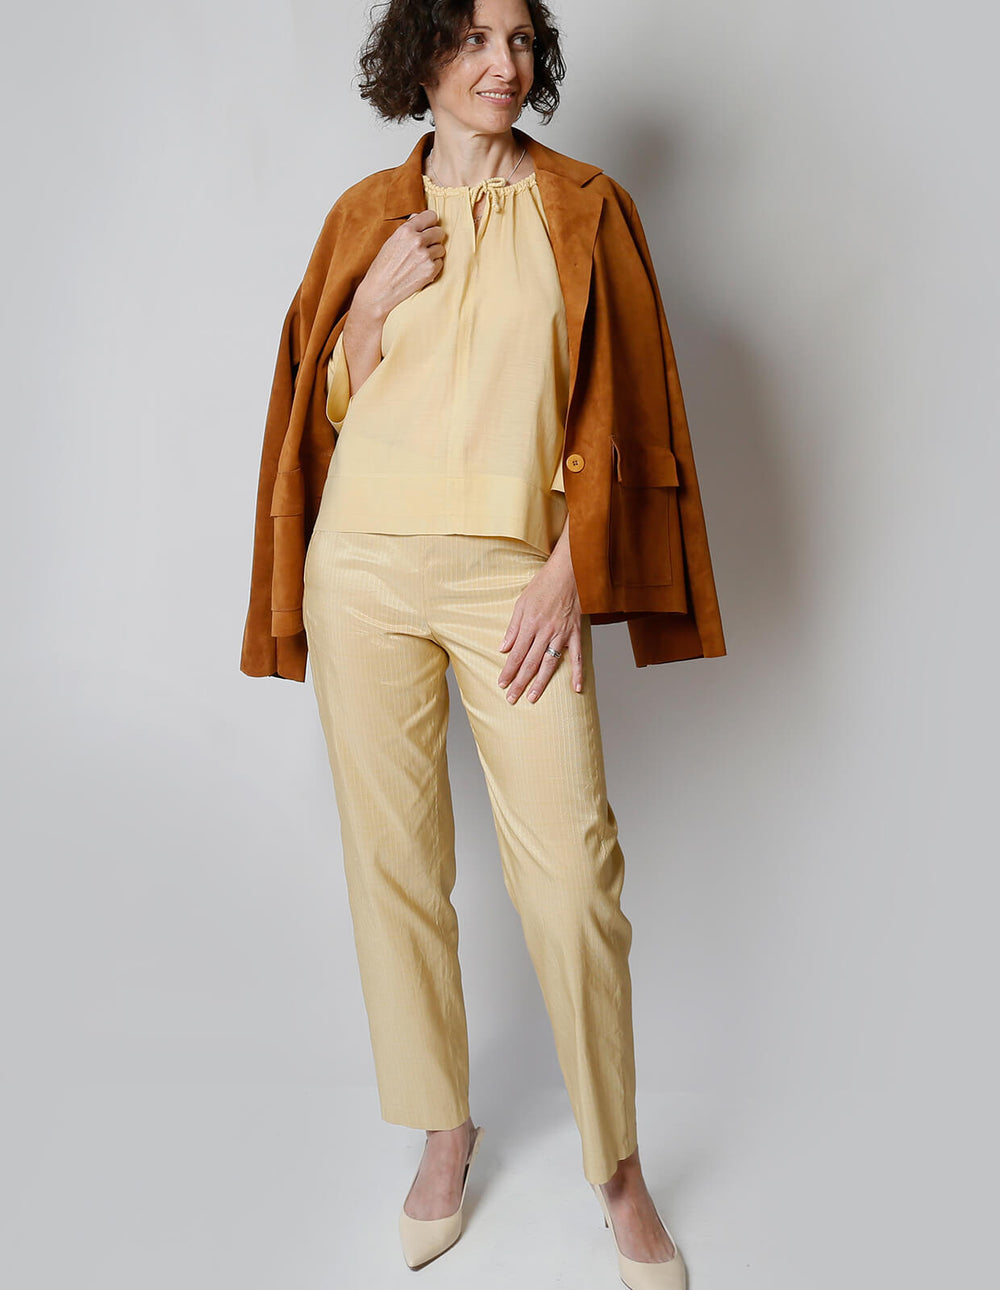 Woman wearing the Classic Trouser sewing pattern from The Maker's Atelier on The Fold Line. A Trouser pattern made in cottons, linens, denim, wool flannel or poly/viscose crepe fabrics, featuring a straight-leg, side zip, no waistband, back waist darts an